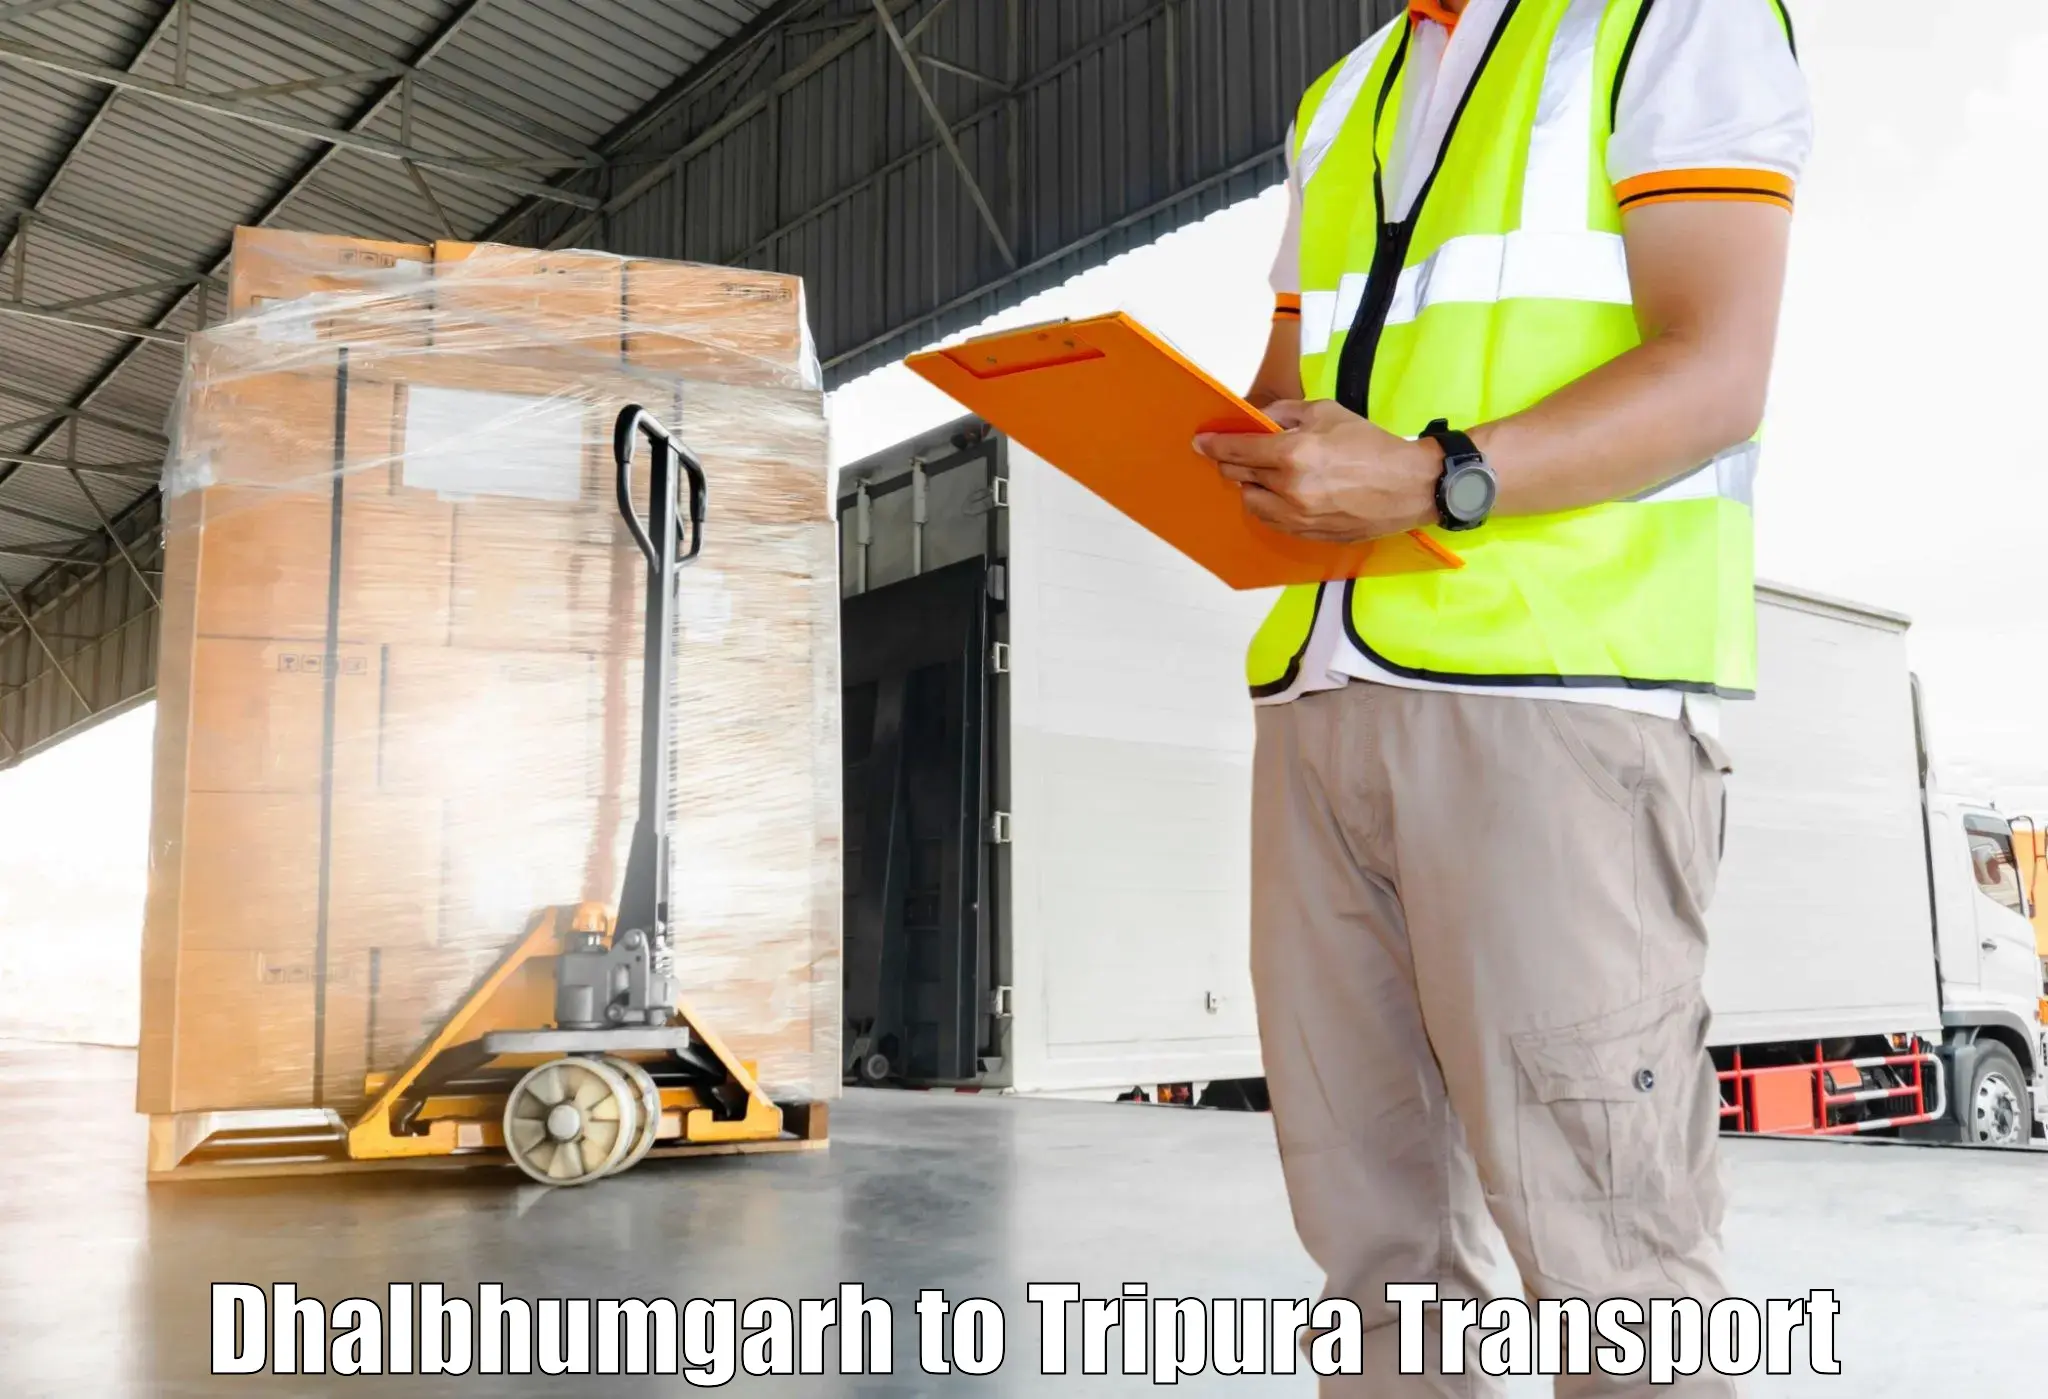 Container transport service Dhalbhumgarh to Manughat